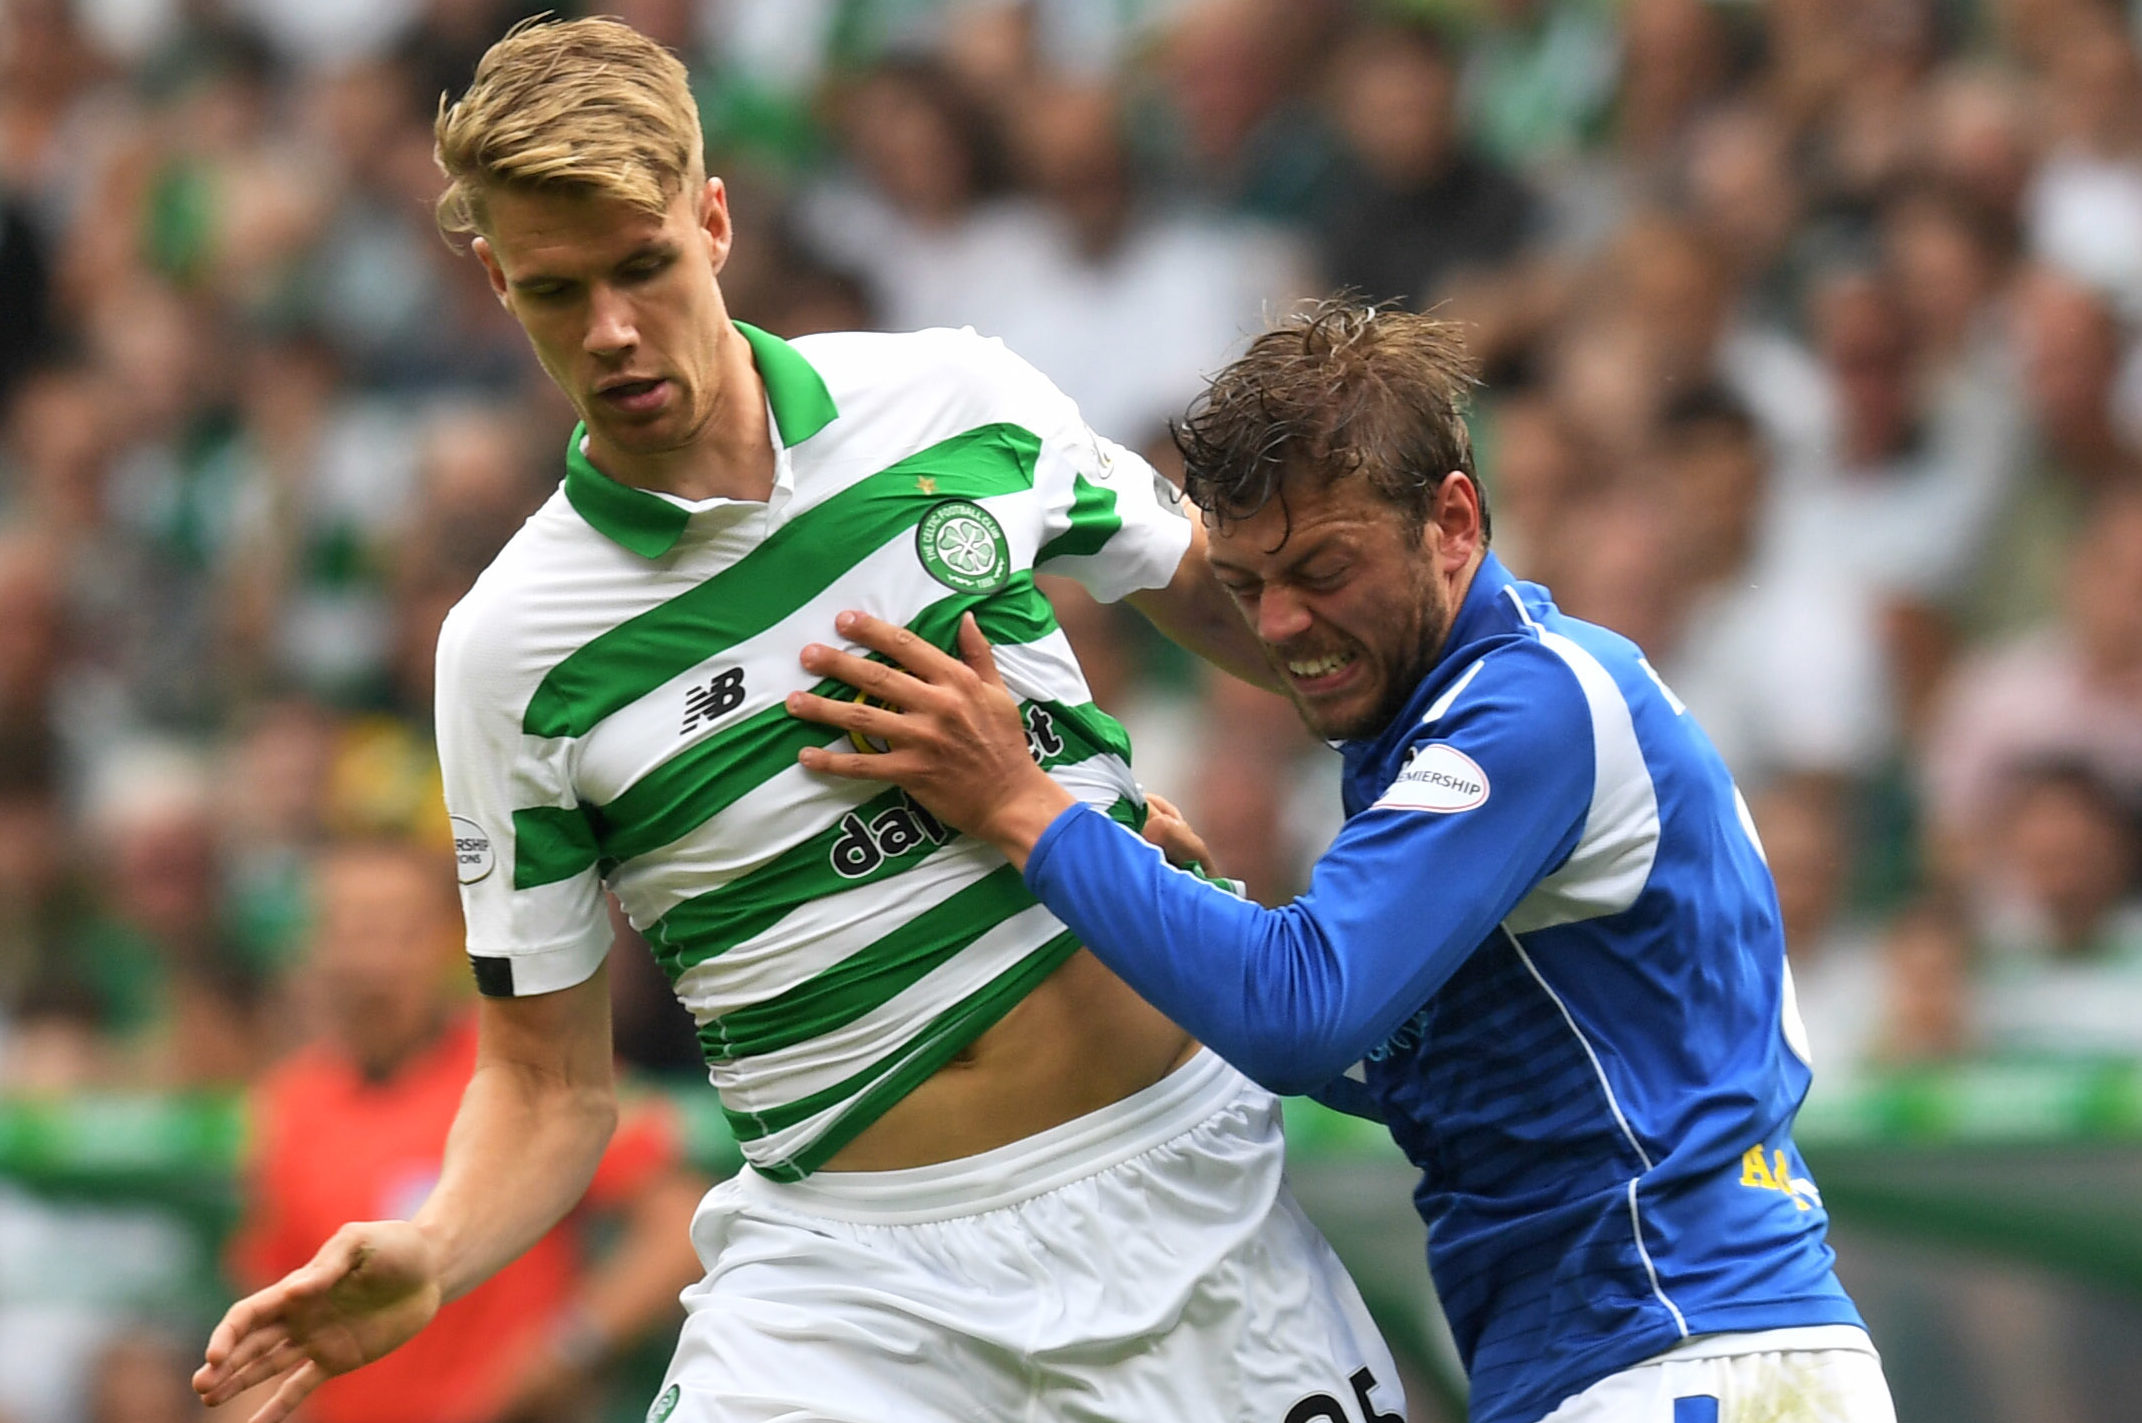 Celtic's Kris Ajer and Murray Davidson in action.